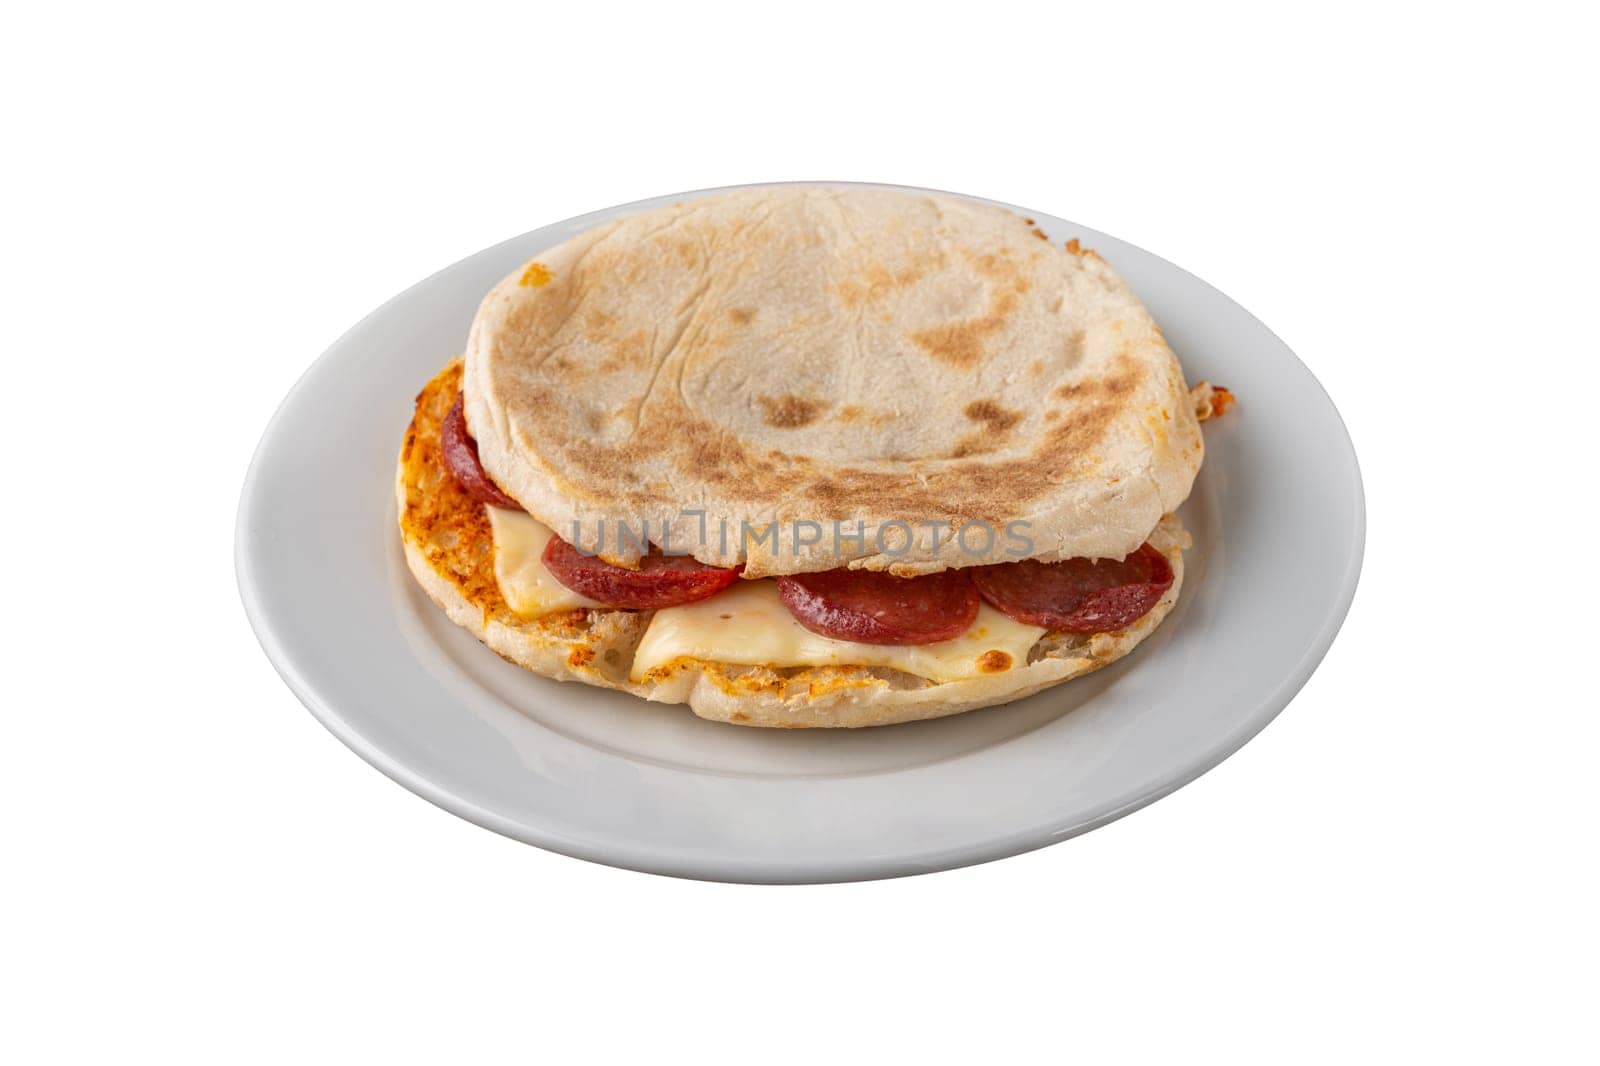 Flatbread toast with salami, turkish sausage and cheddar on white background by Sonat